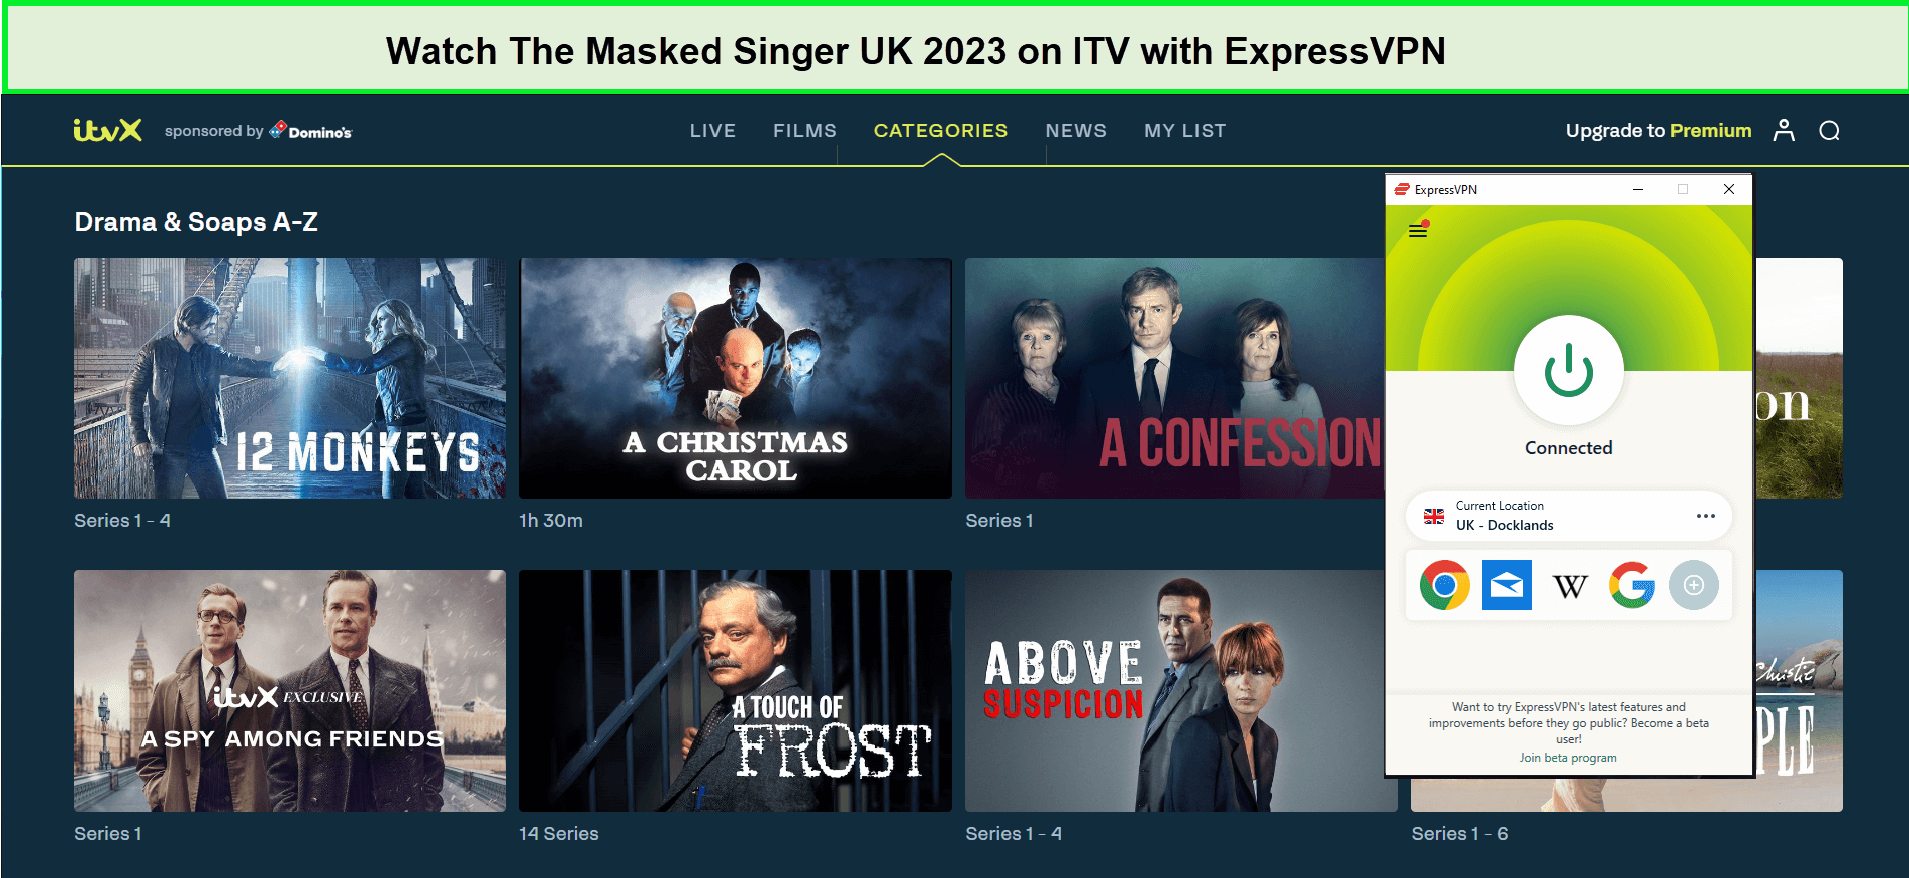 Watch-The-Masked-Singer-UK-2023-in-Singapore-on-ITV-with-ExpressVPN